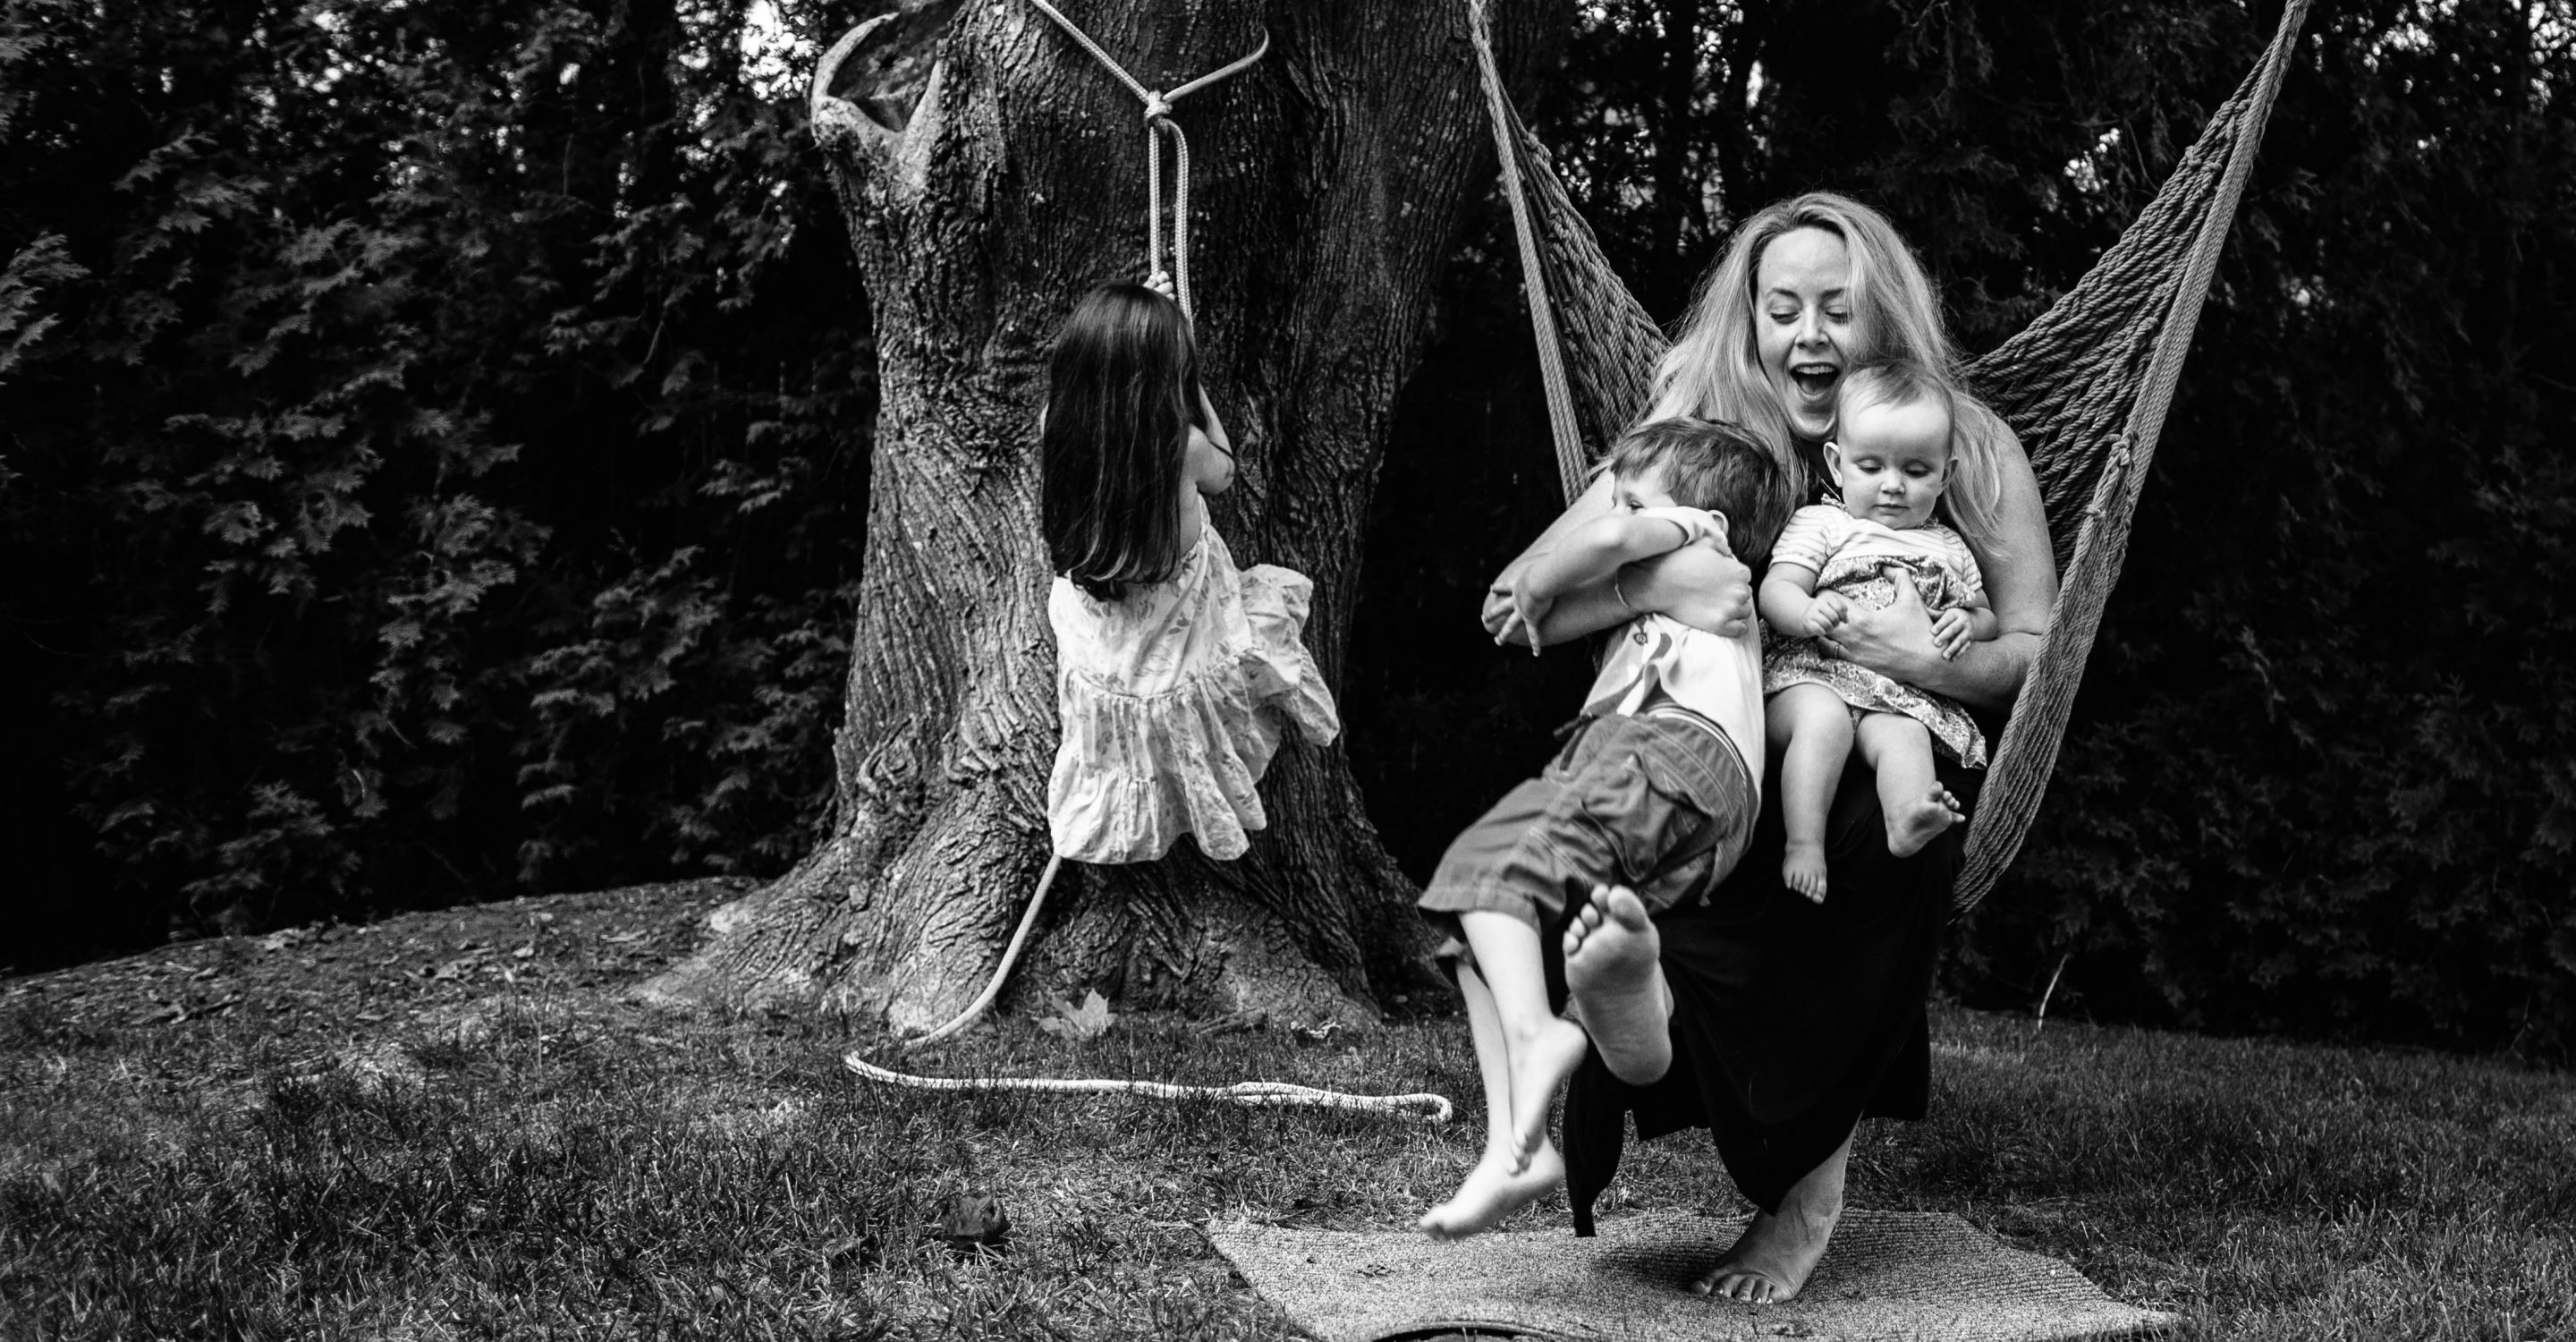 mom on rope swing with two little kids and girl climbing up tree